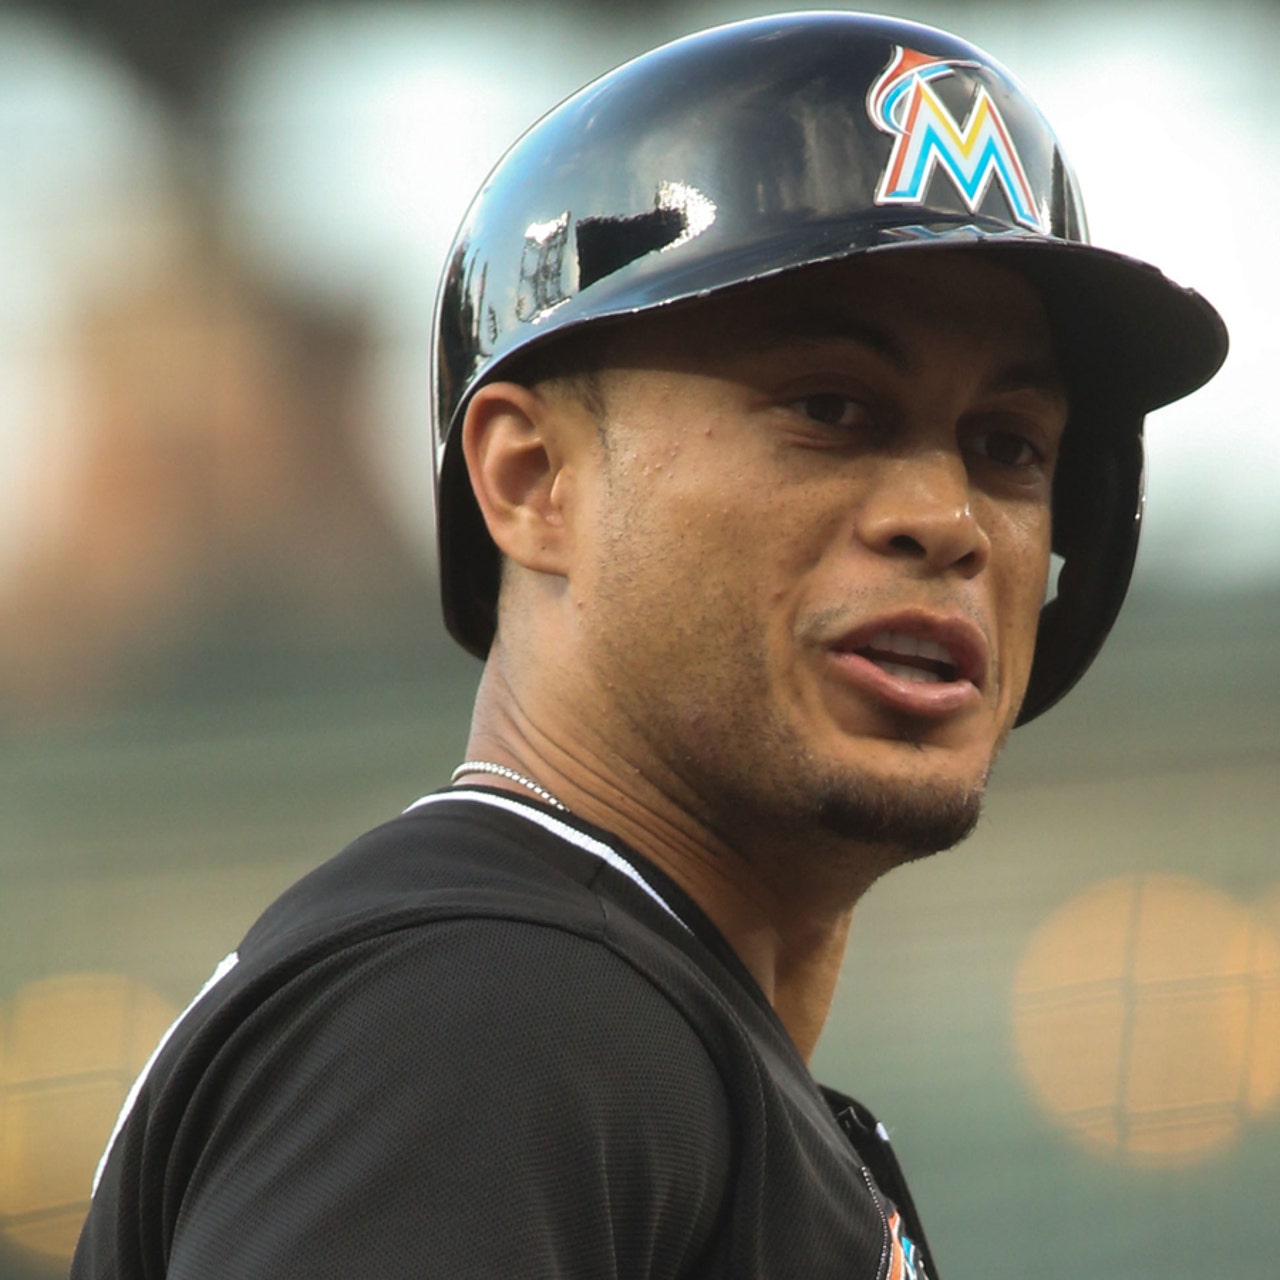 MLB: Giancarlo Stanton of Miami Marlins to sign richest contract